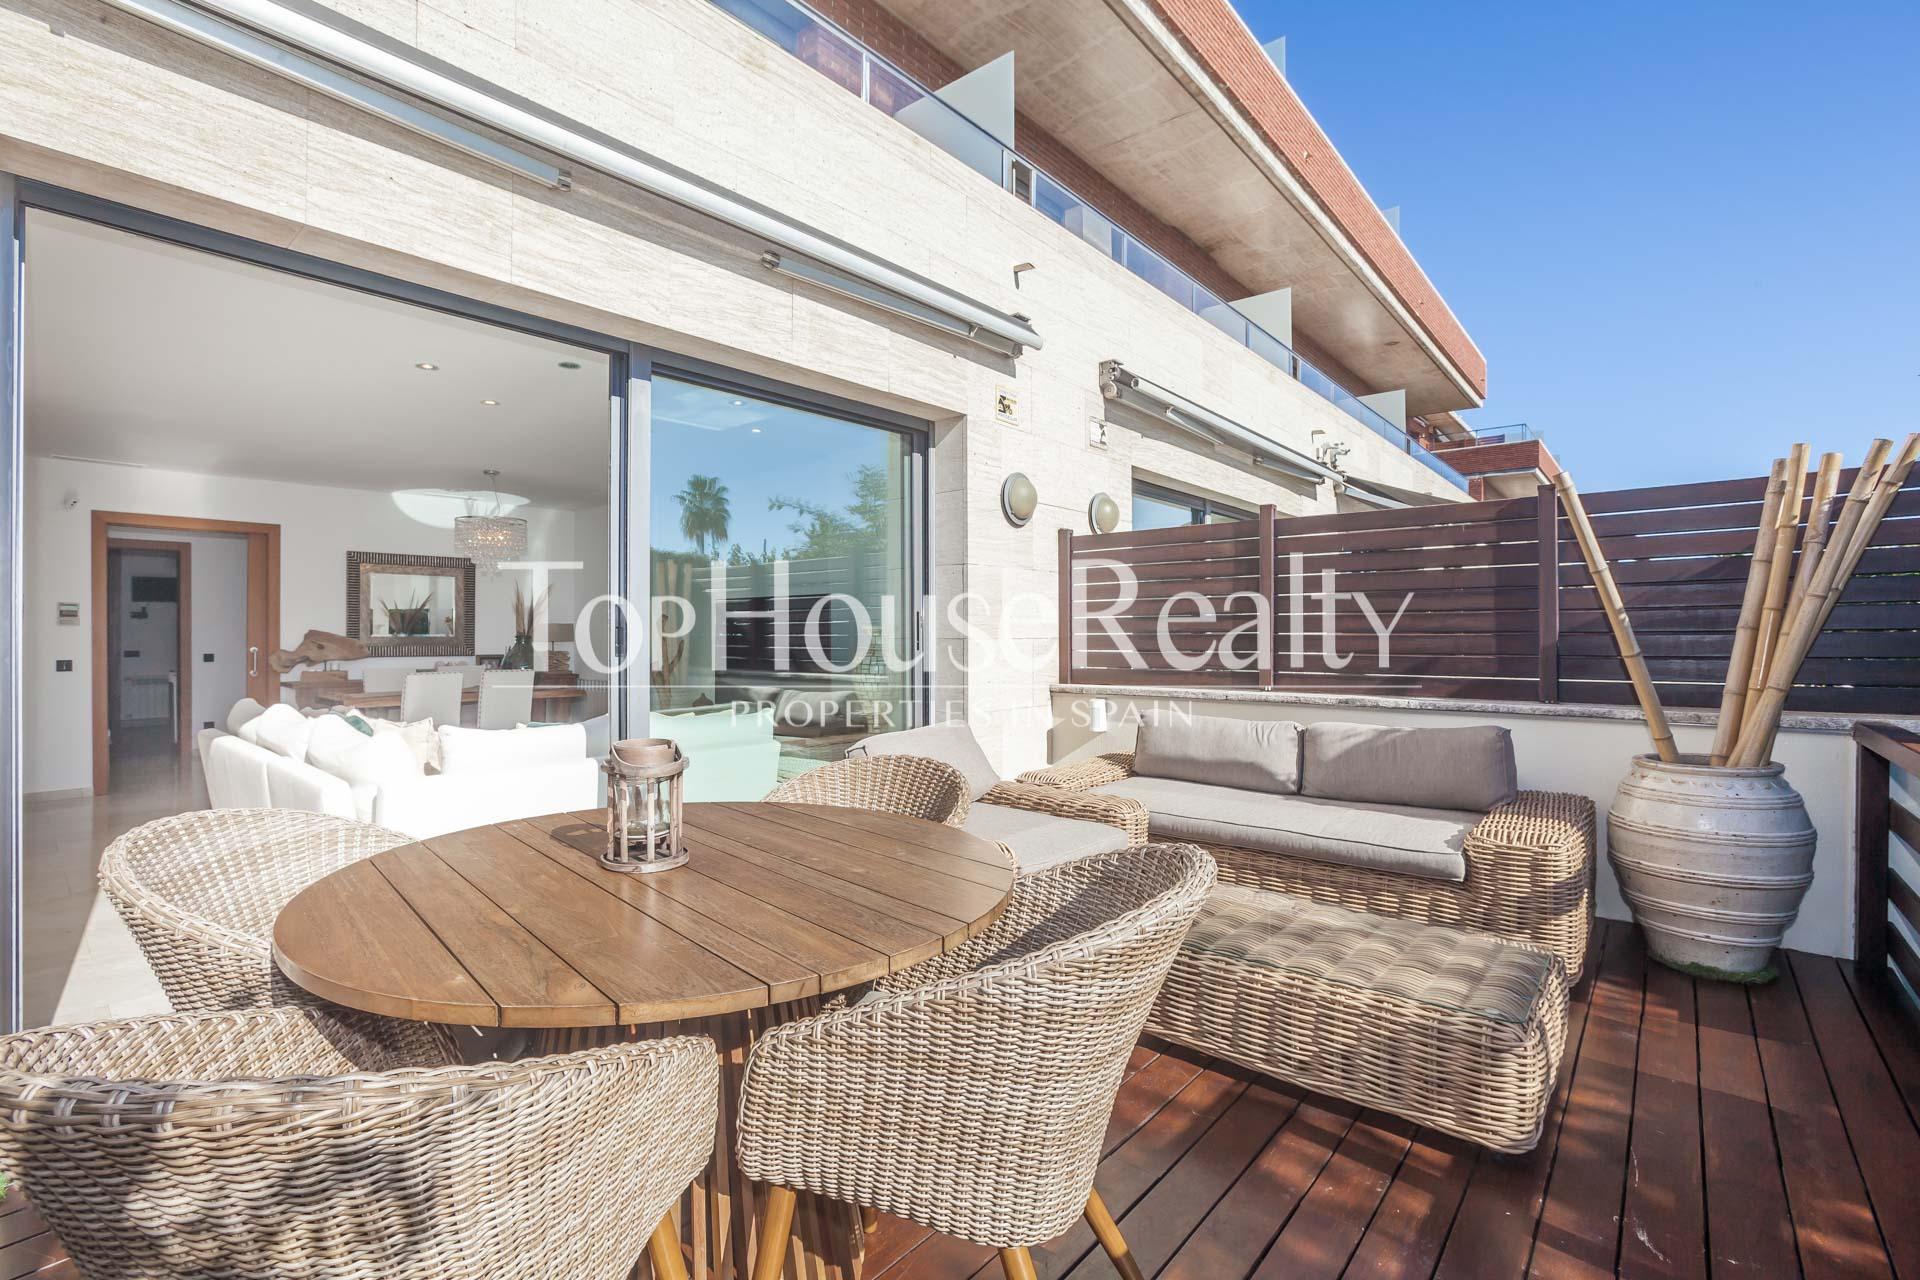 Townhouse in front of the sea in Castelldefels.